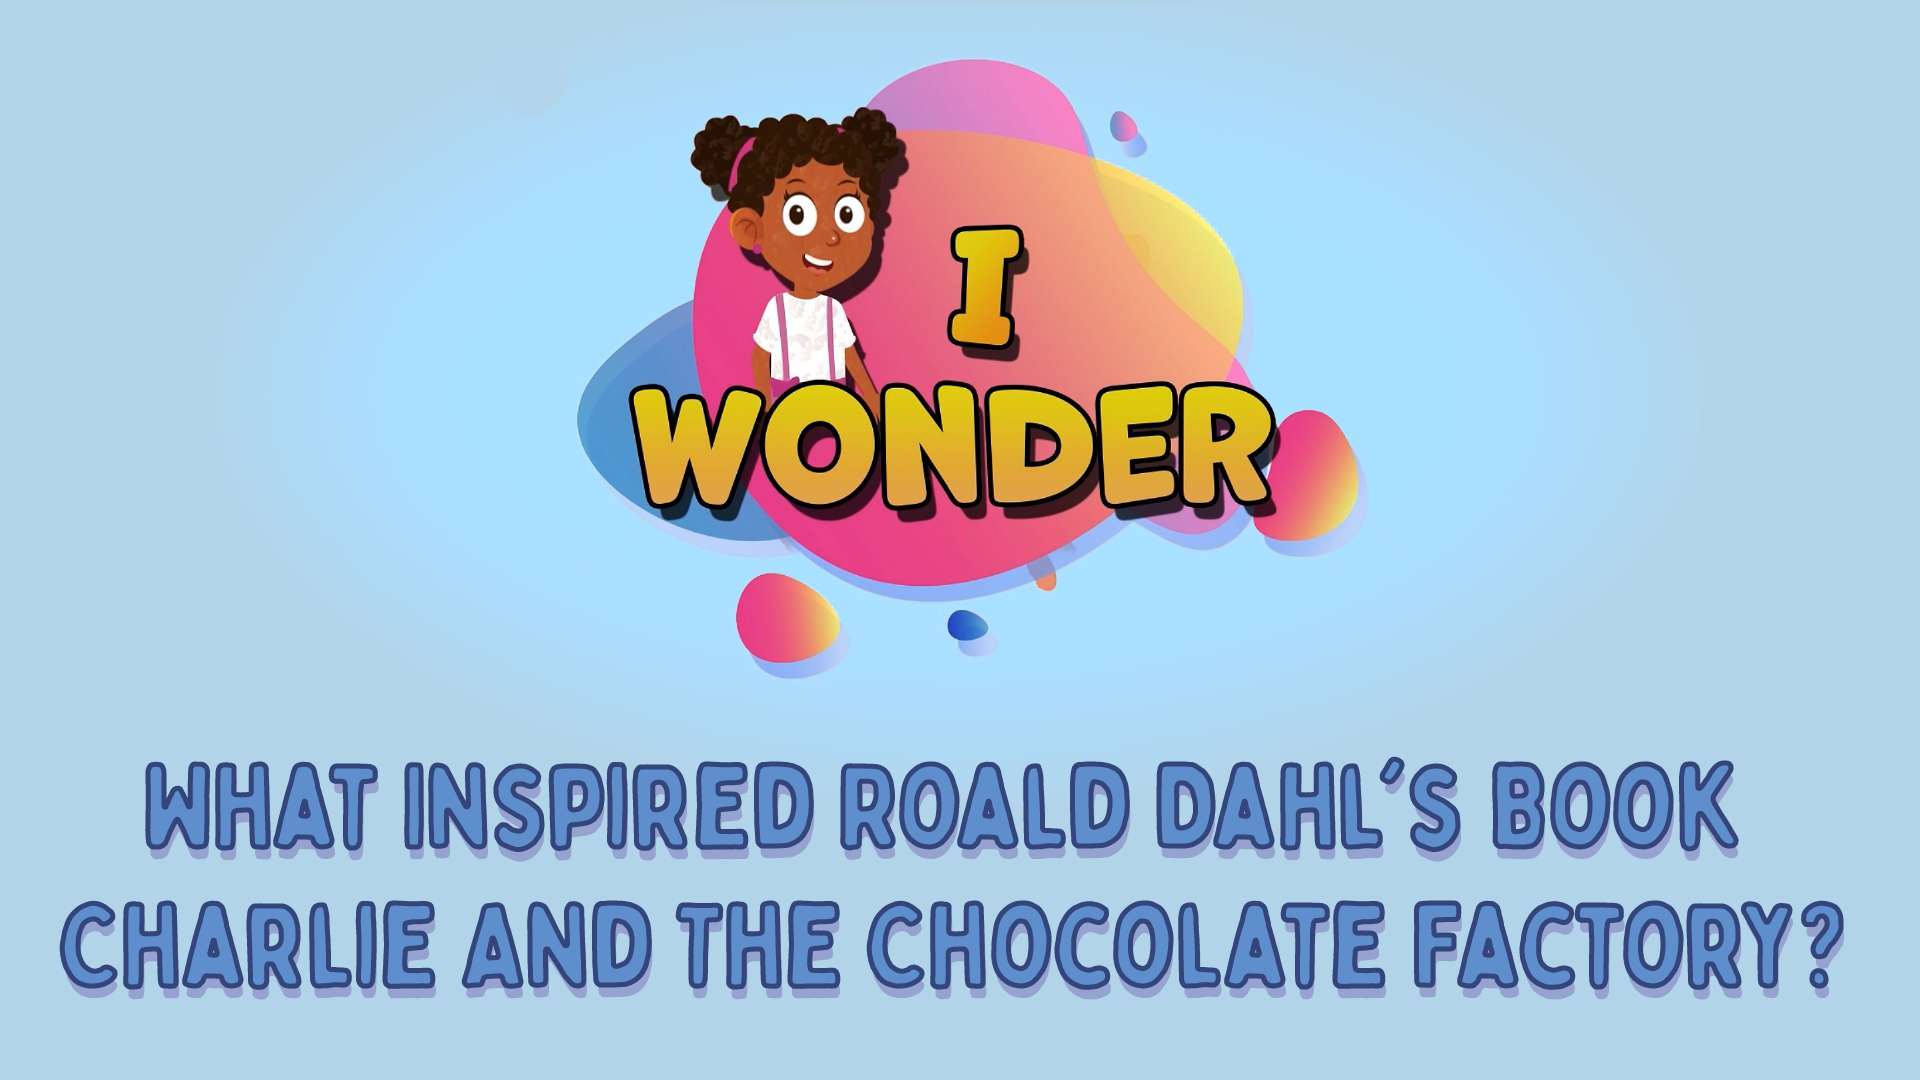 What Inspired Roald Dahl’s Book Charlie And The Chocolate Factory?